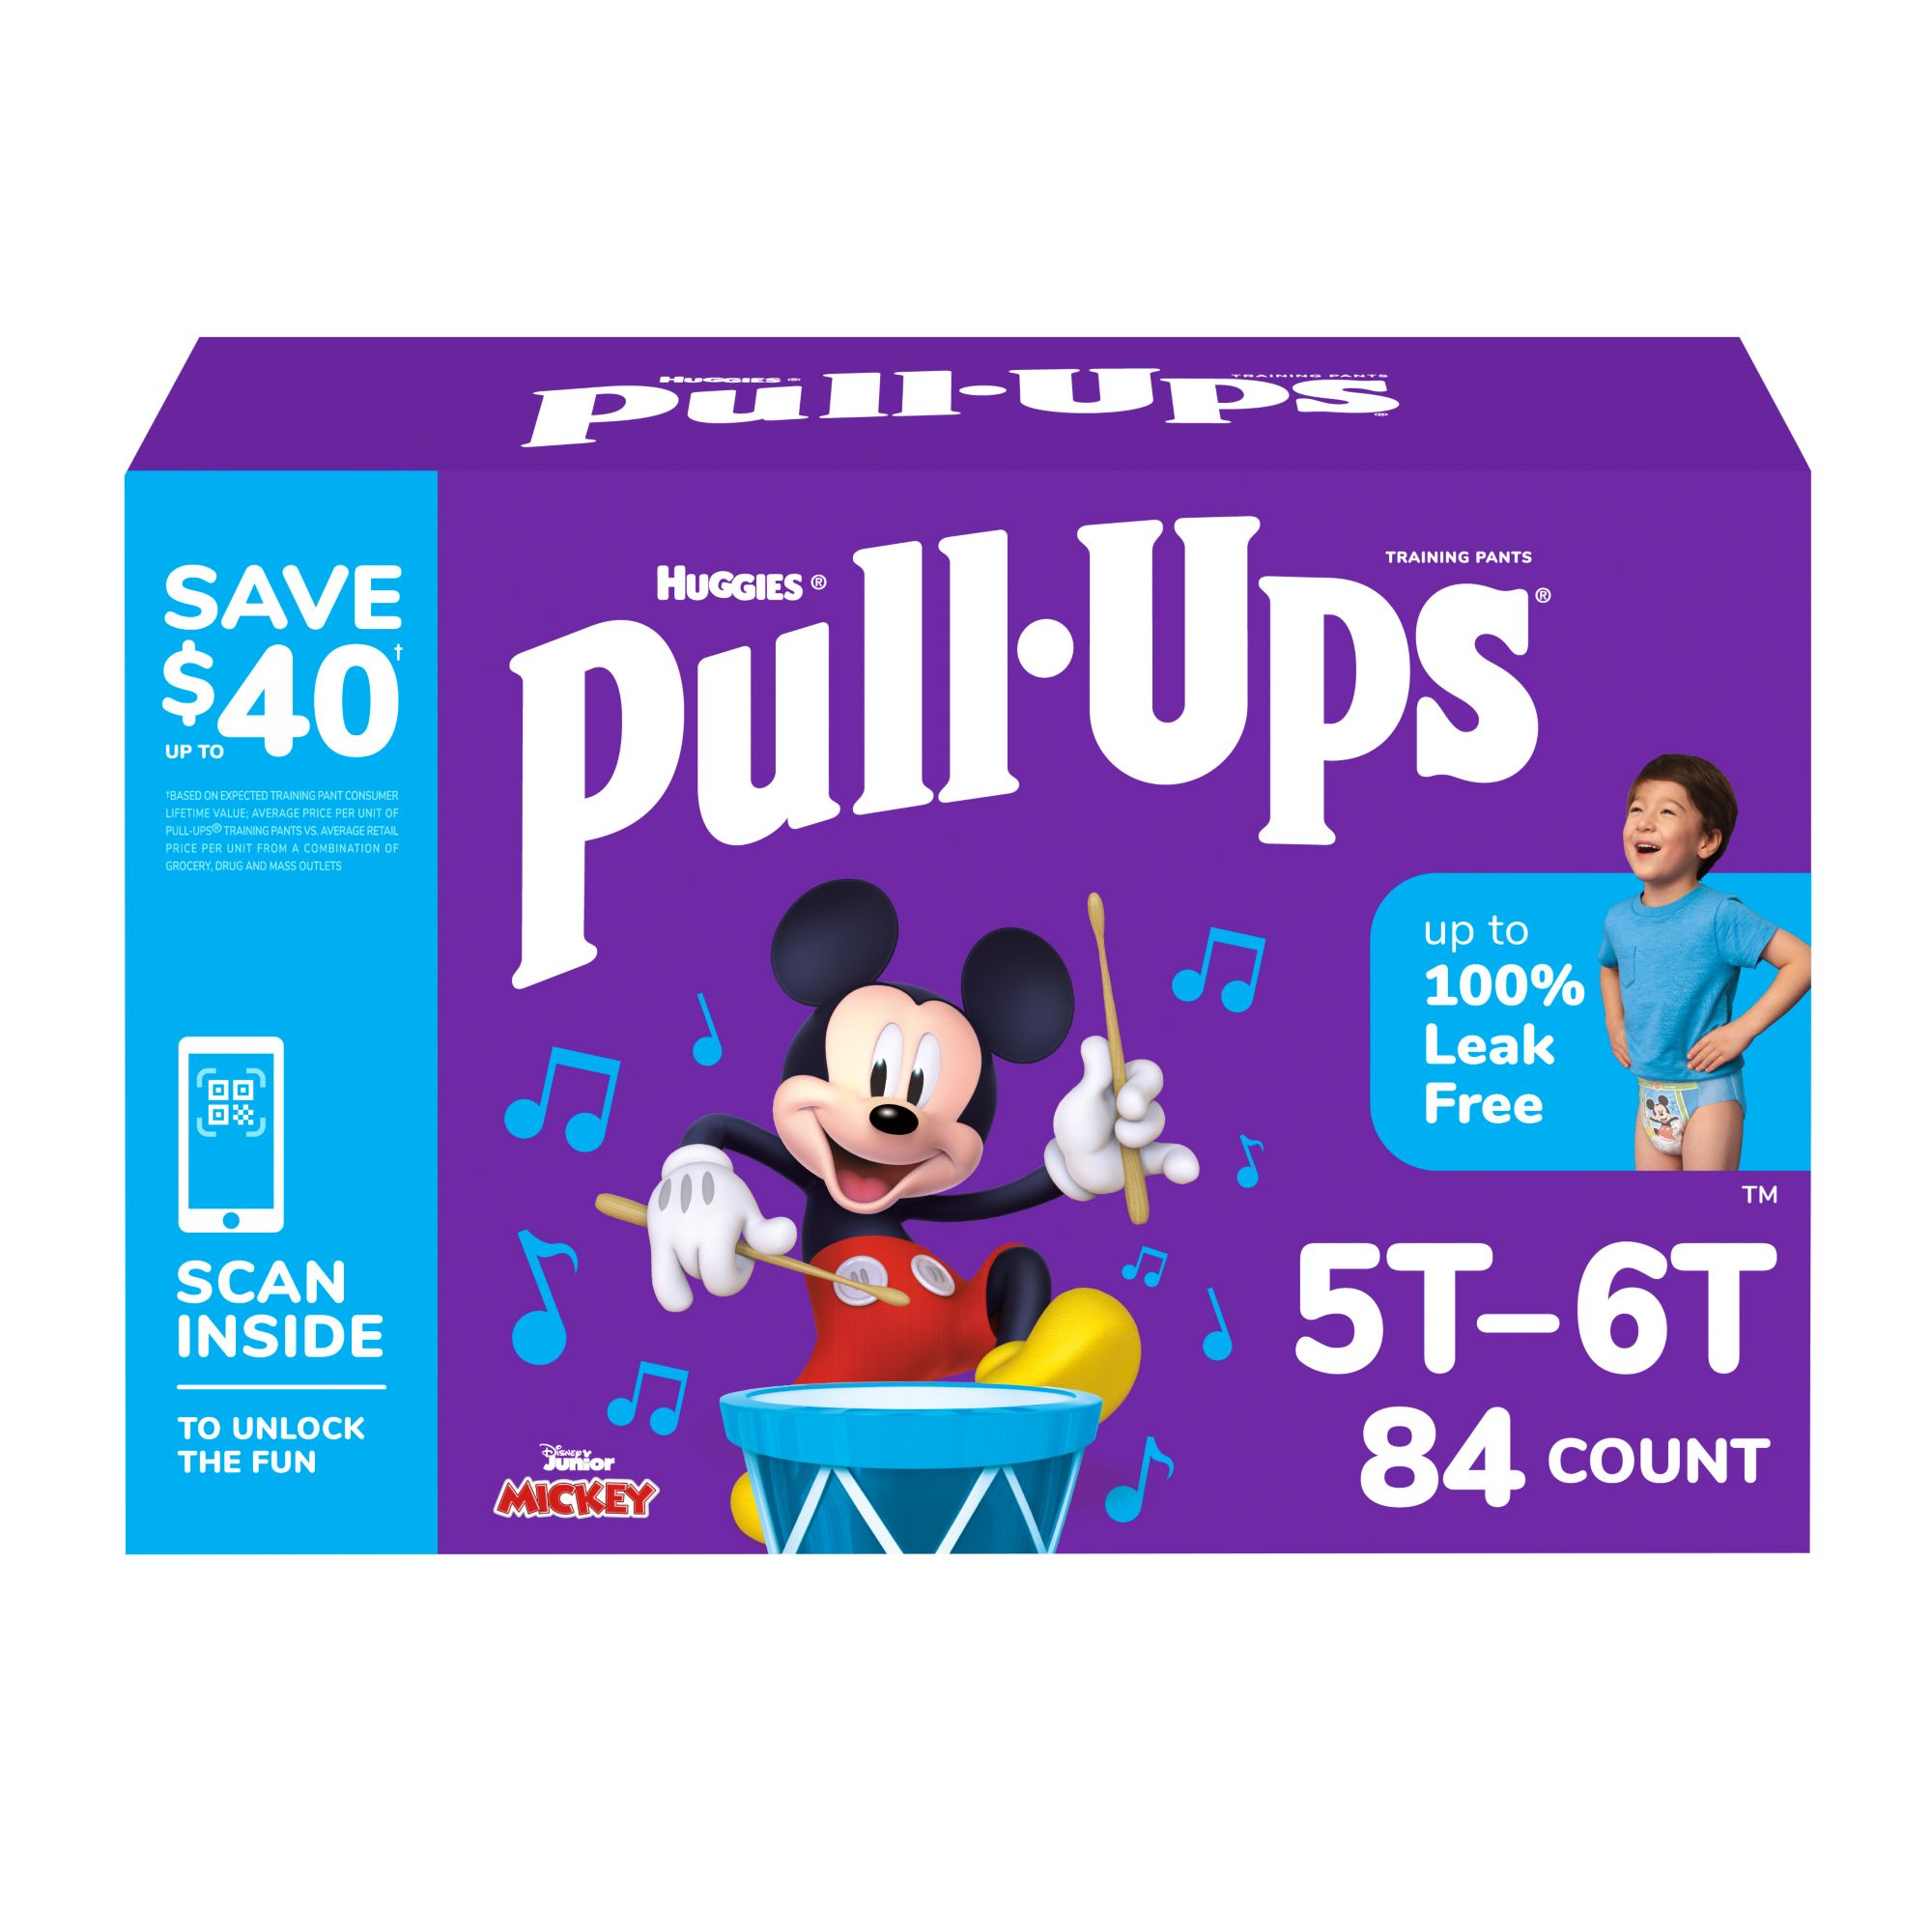 Pull-Ups Girls' Potty Training Pants, 3T-4T, 92 Count (Select for